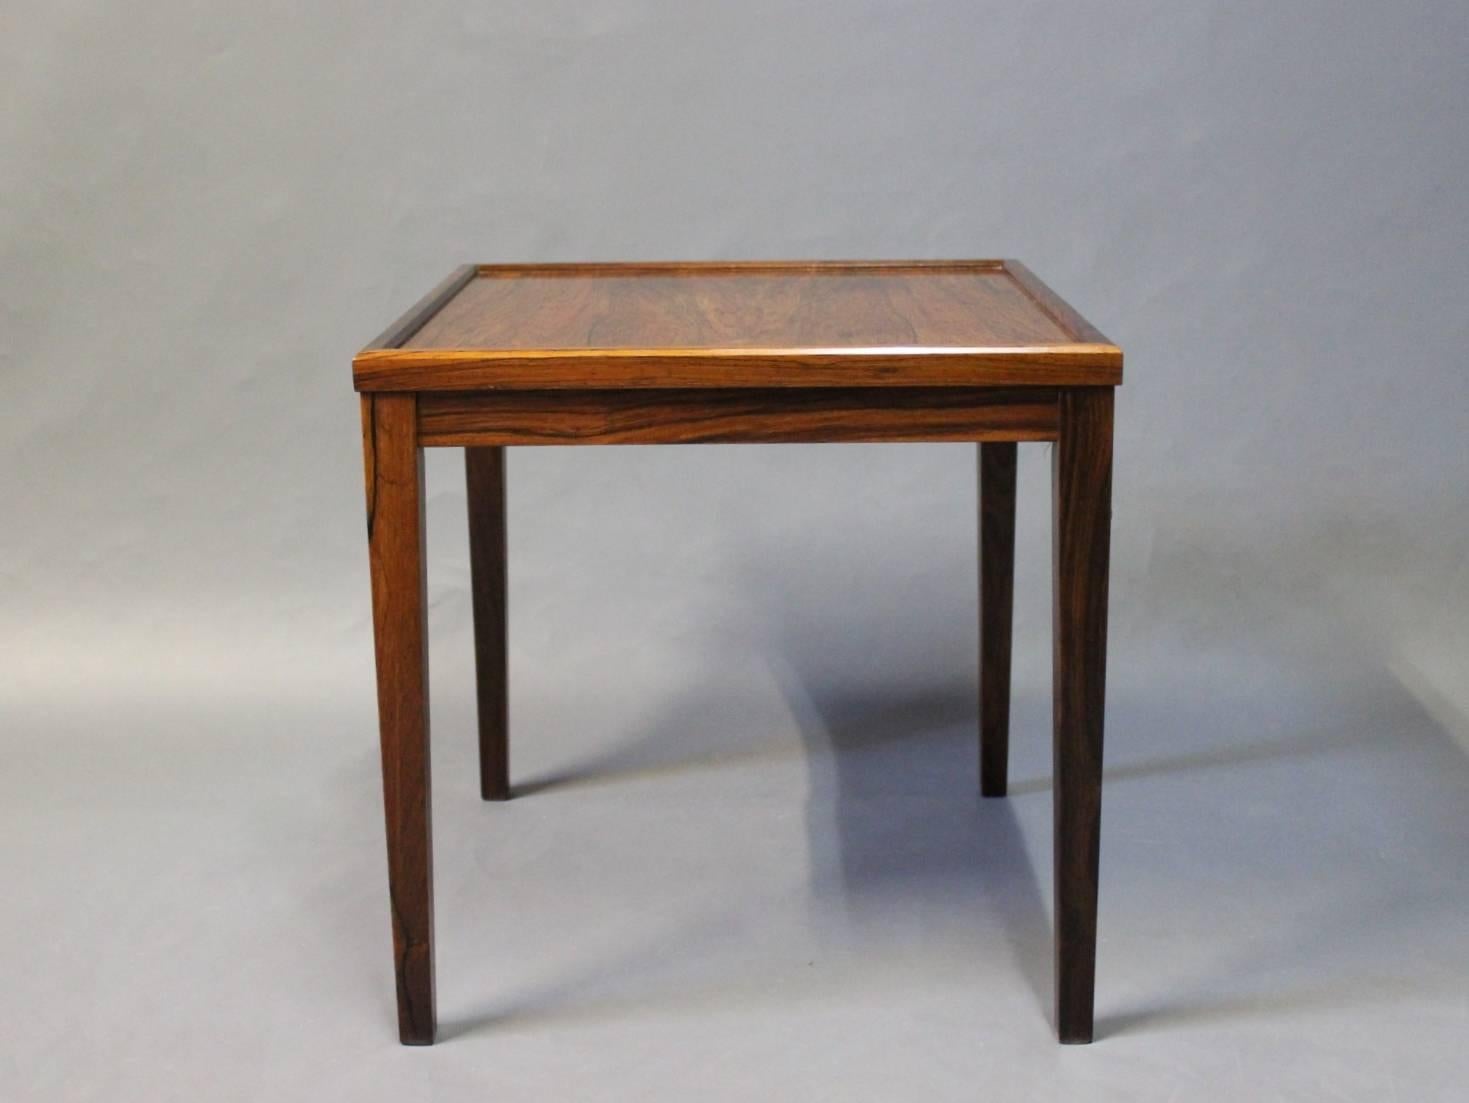 Small side table in rosewood of Danish design from the 1960s. The table is in great condition.